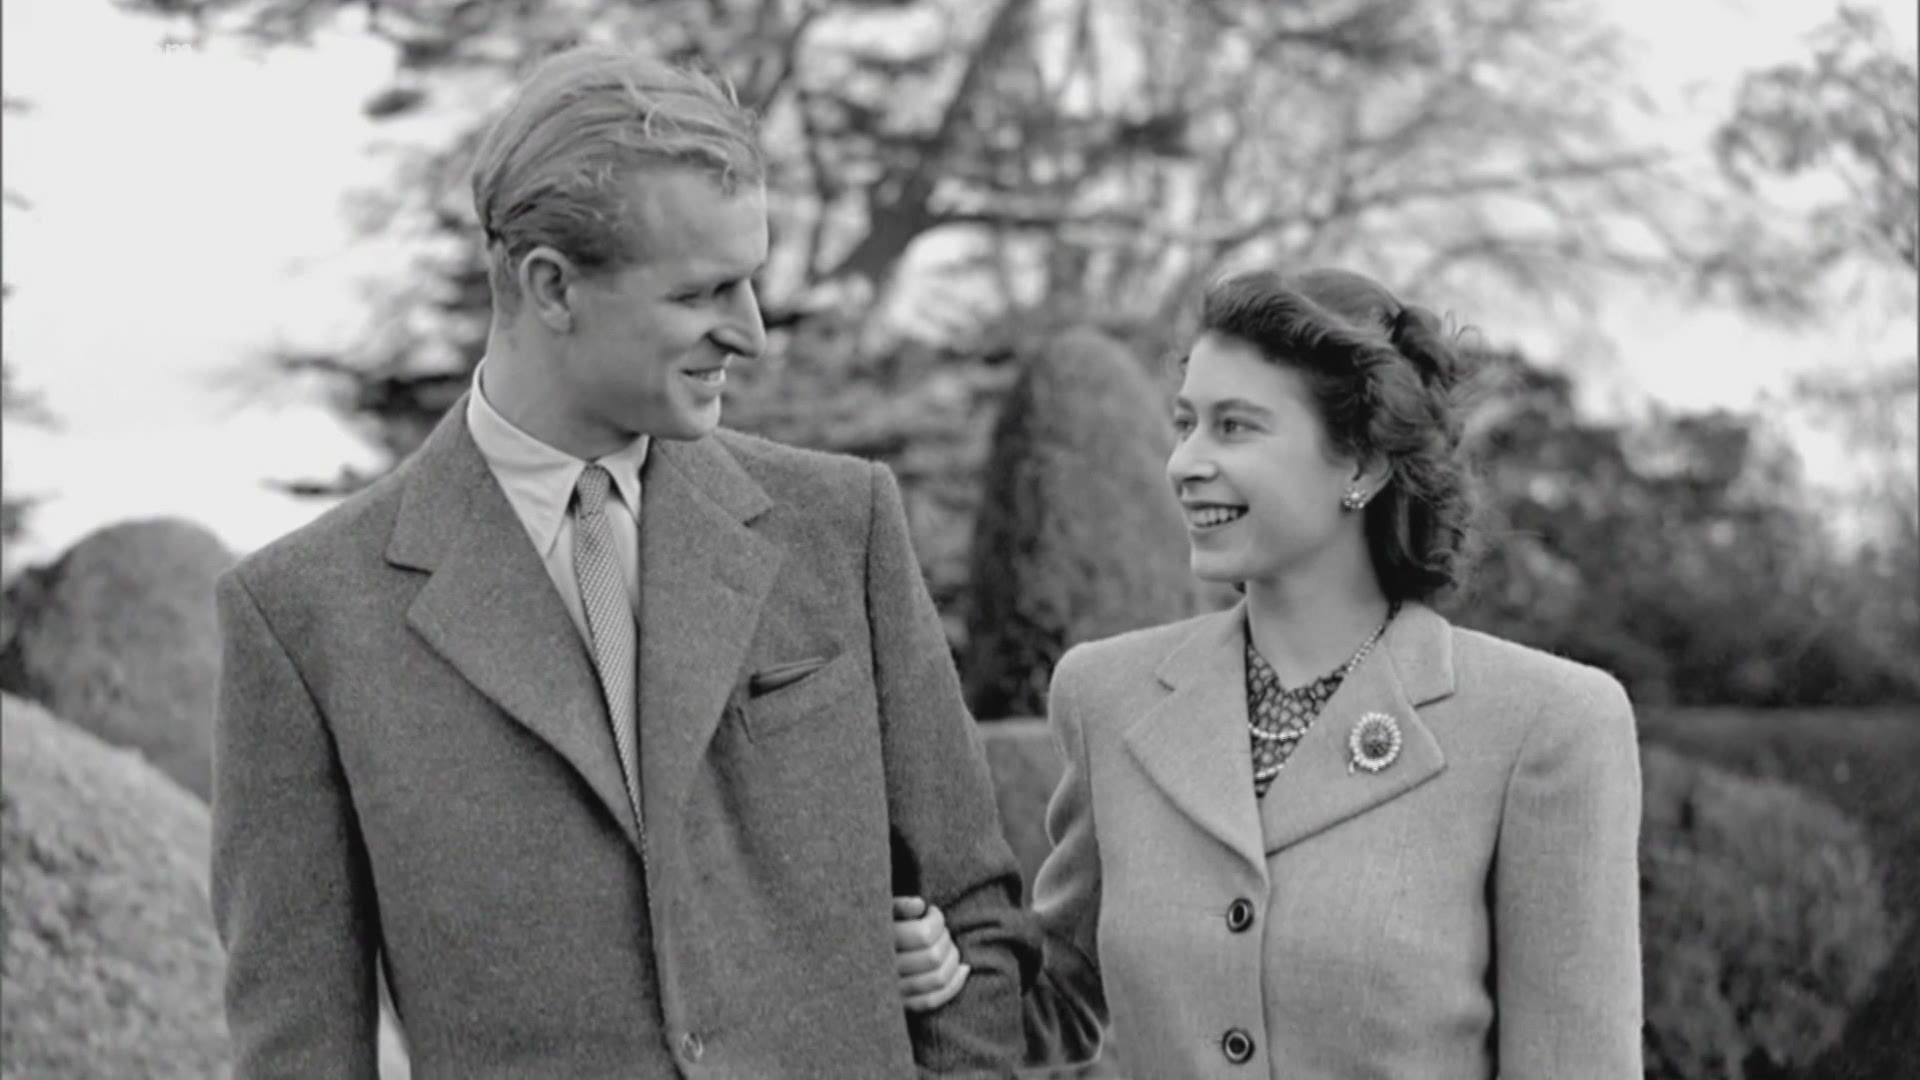 Prince Philip, the Duke of Edinburgh and husband to the Queen, has died.